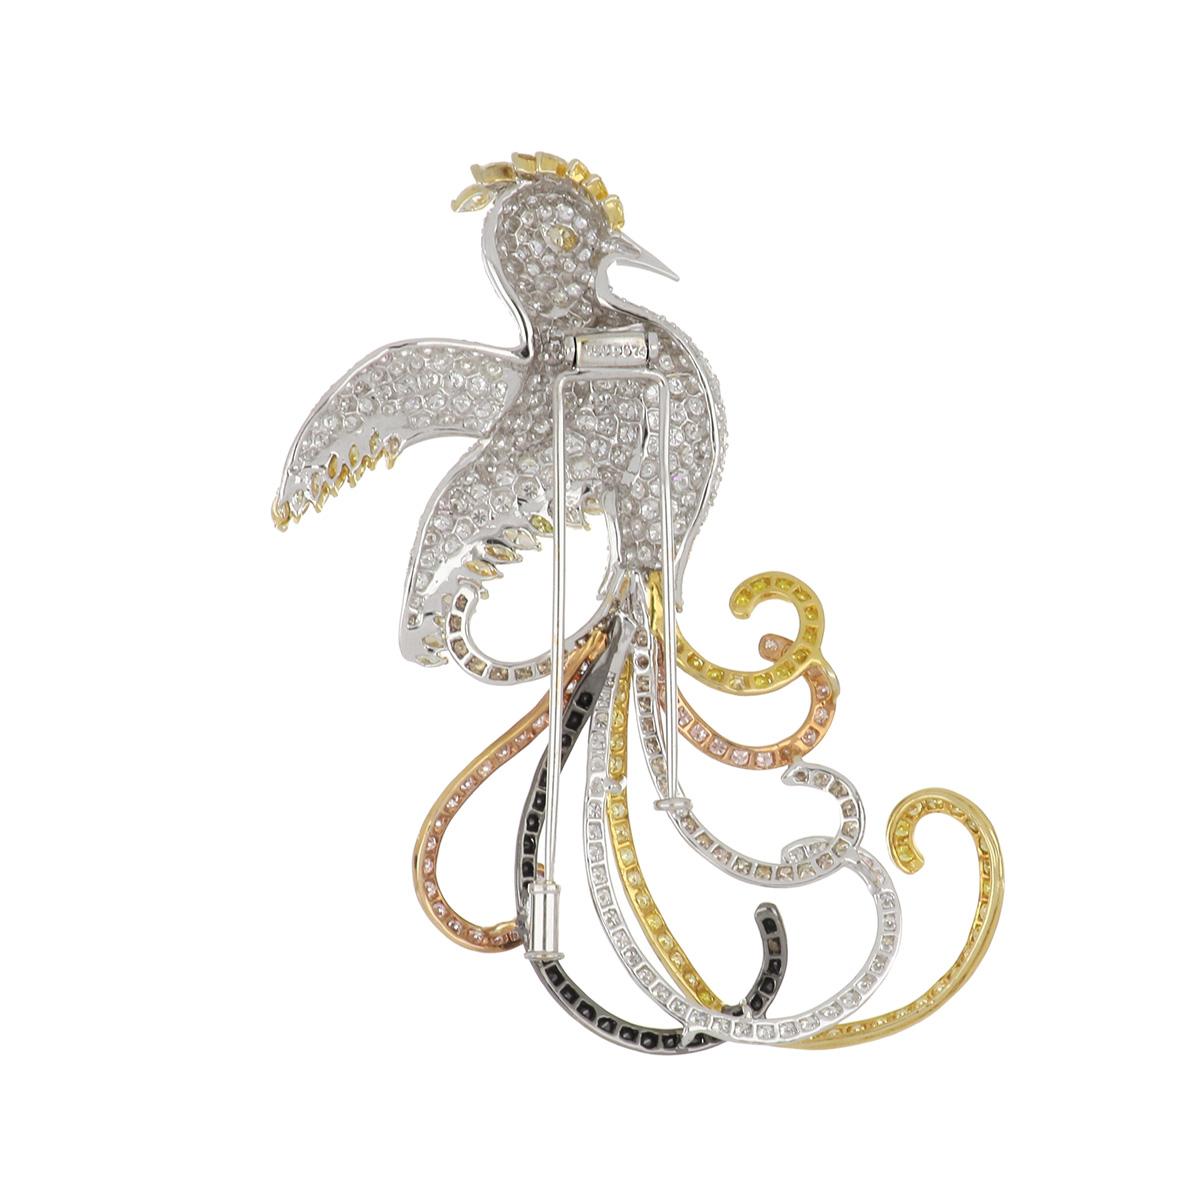 Phoenix brooch composed of 18K white, yellow, pink, and blackened gold with over 400 diamonds that total 9 carats.  The body of the phoenix is primarily white diamonds, accented with marquise shaped colored diamonds, and the tail feathers are pink,